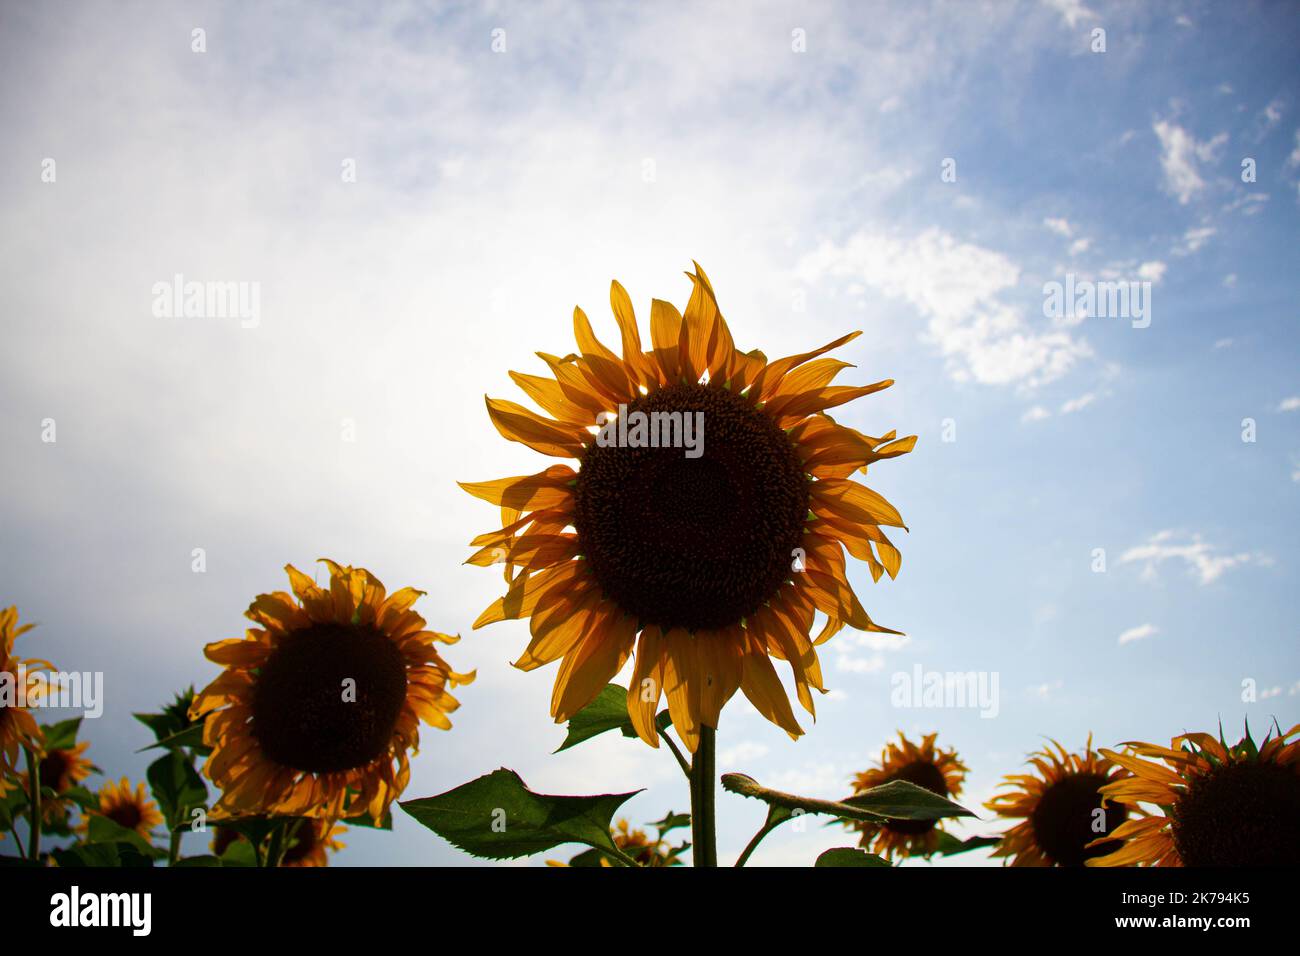 Sunflower in a sunflower field against the backdrop of the sun. Yellow black sunflower flower with green leaves in a natural environment in the rays Stock Photo